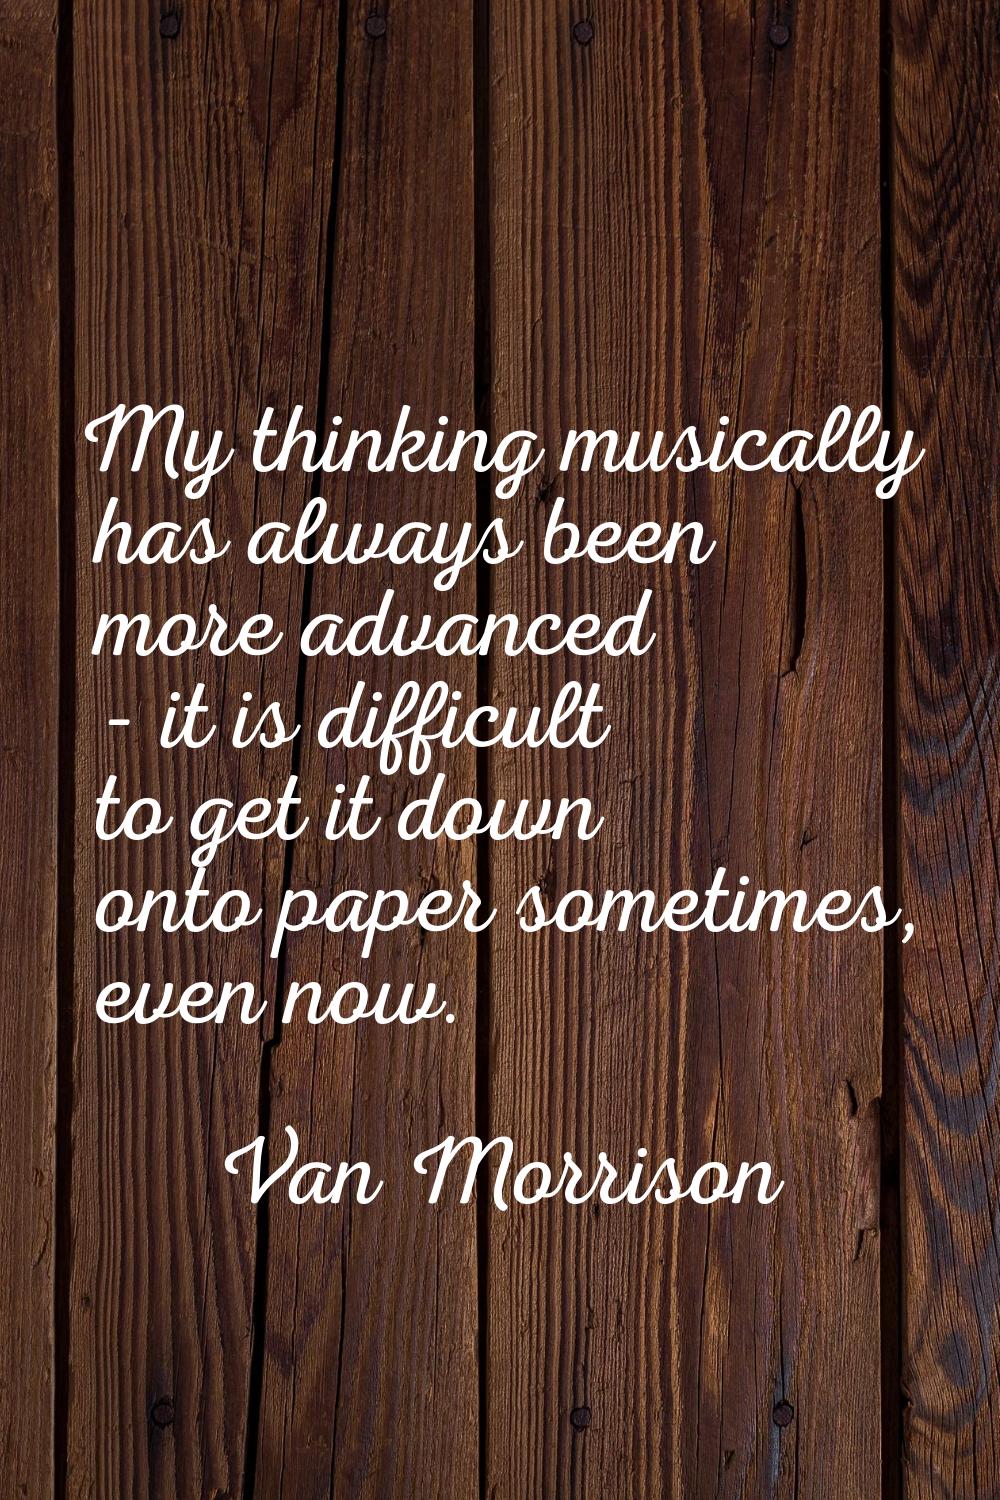 My thinking musically has always been more advanced - it is difficult to get it down onto paper som